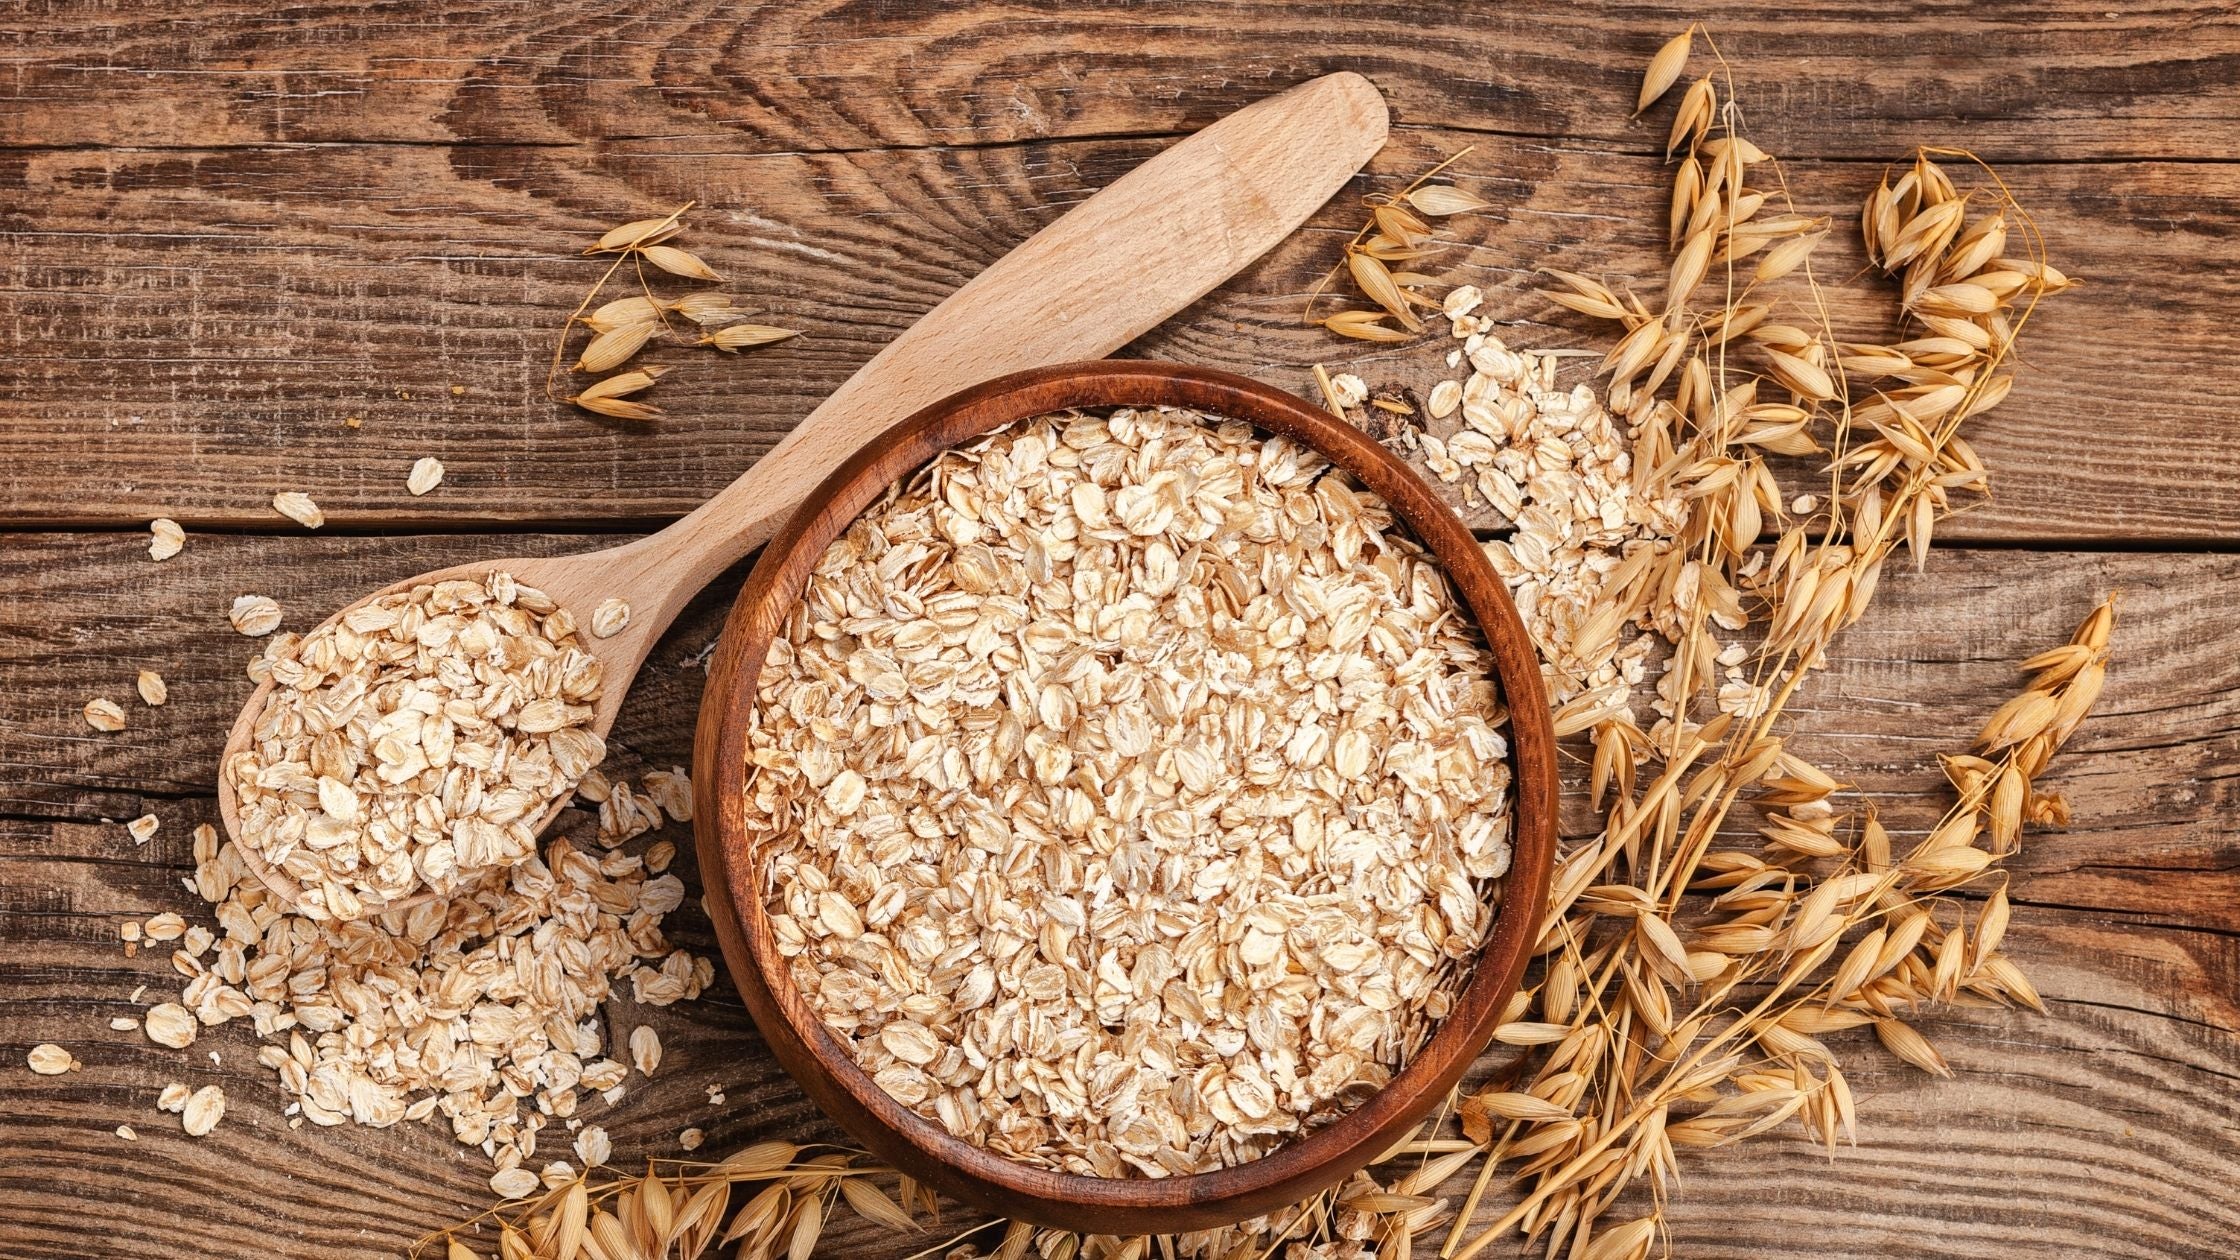 Supercharge Your Skin With Colloidal Oatmeal